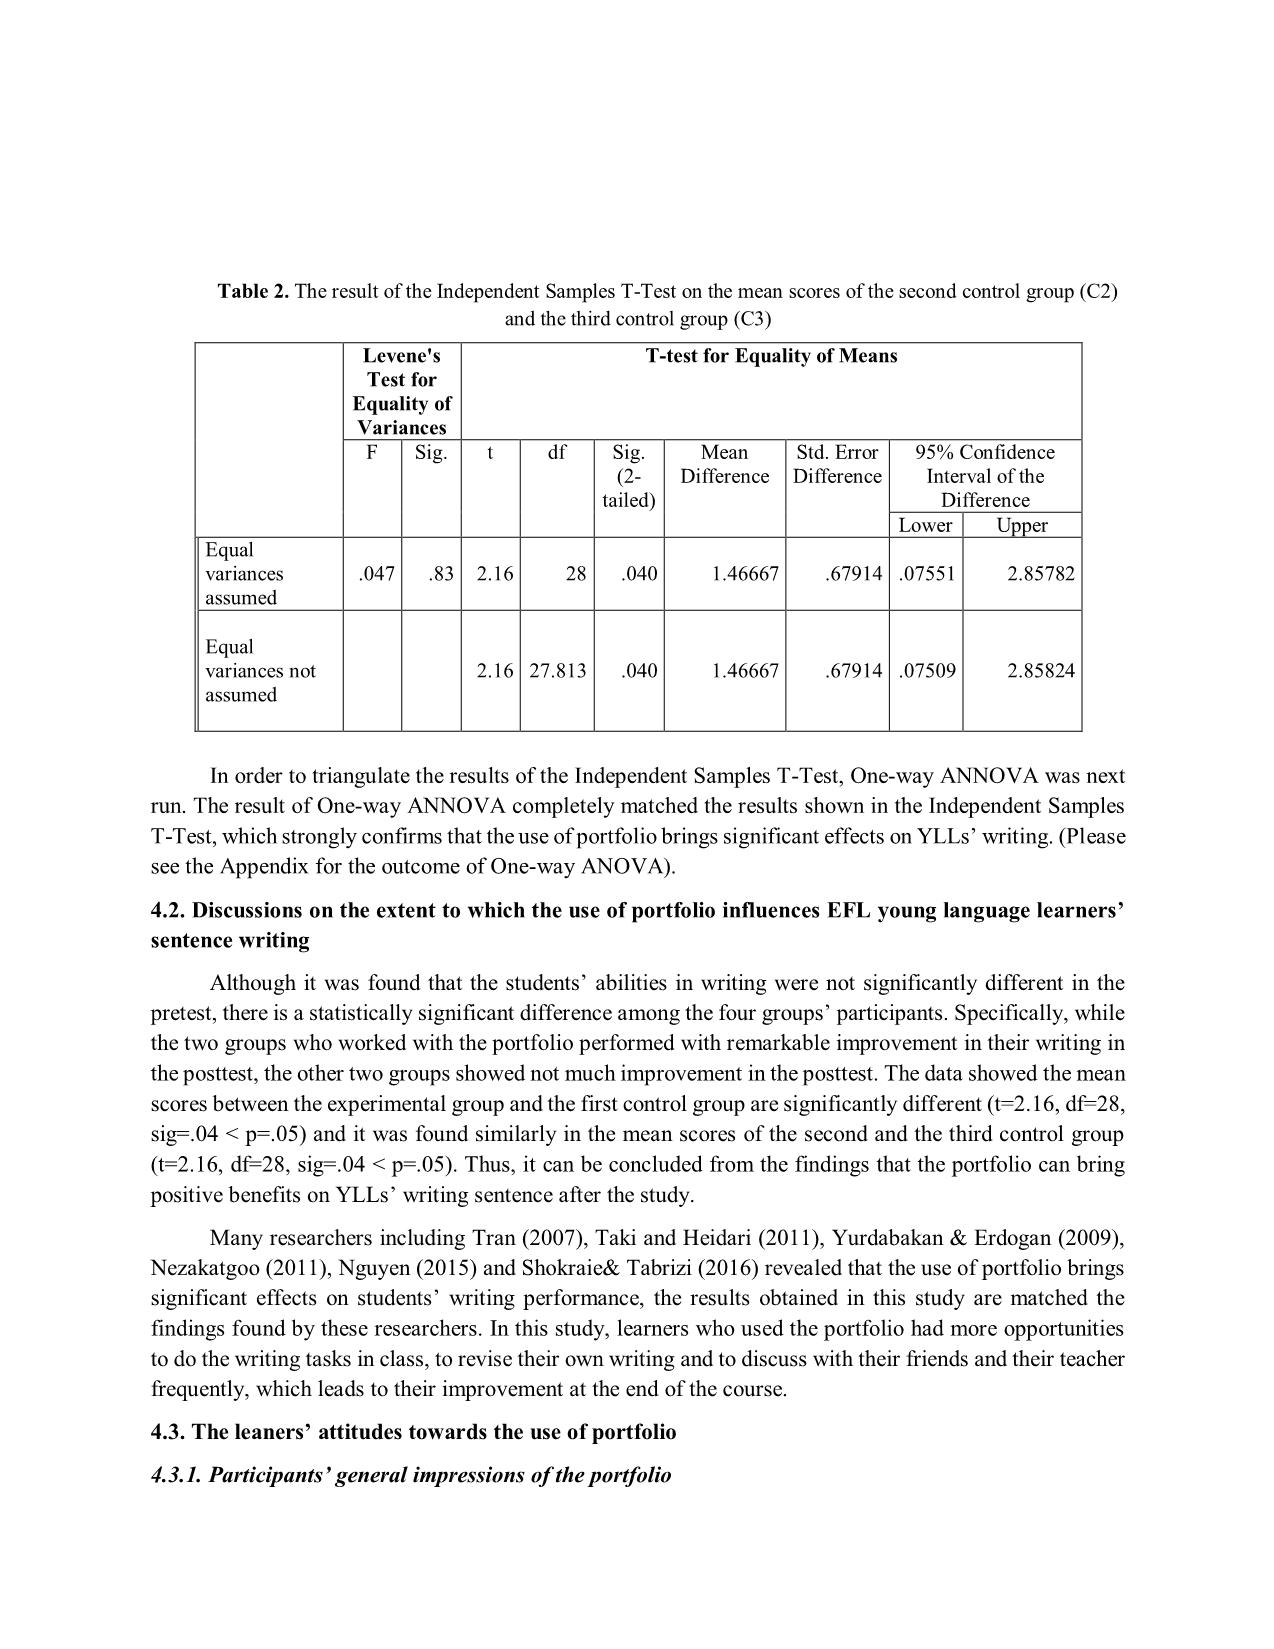 The use of portfolios on efl young learners’ sentence writing: A case at an english language centre in the Mekong delta trang 8